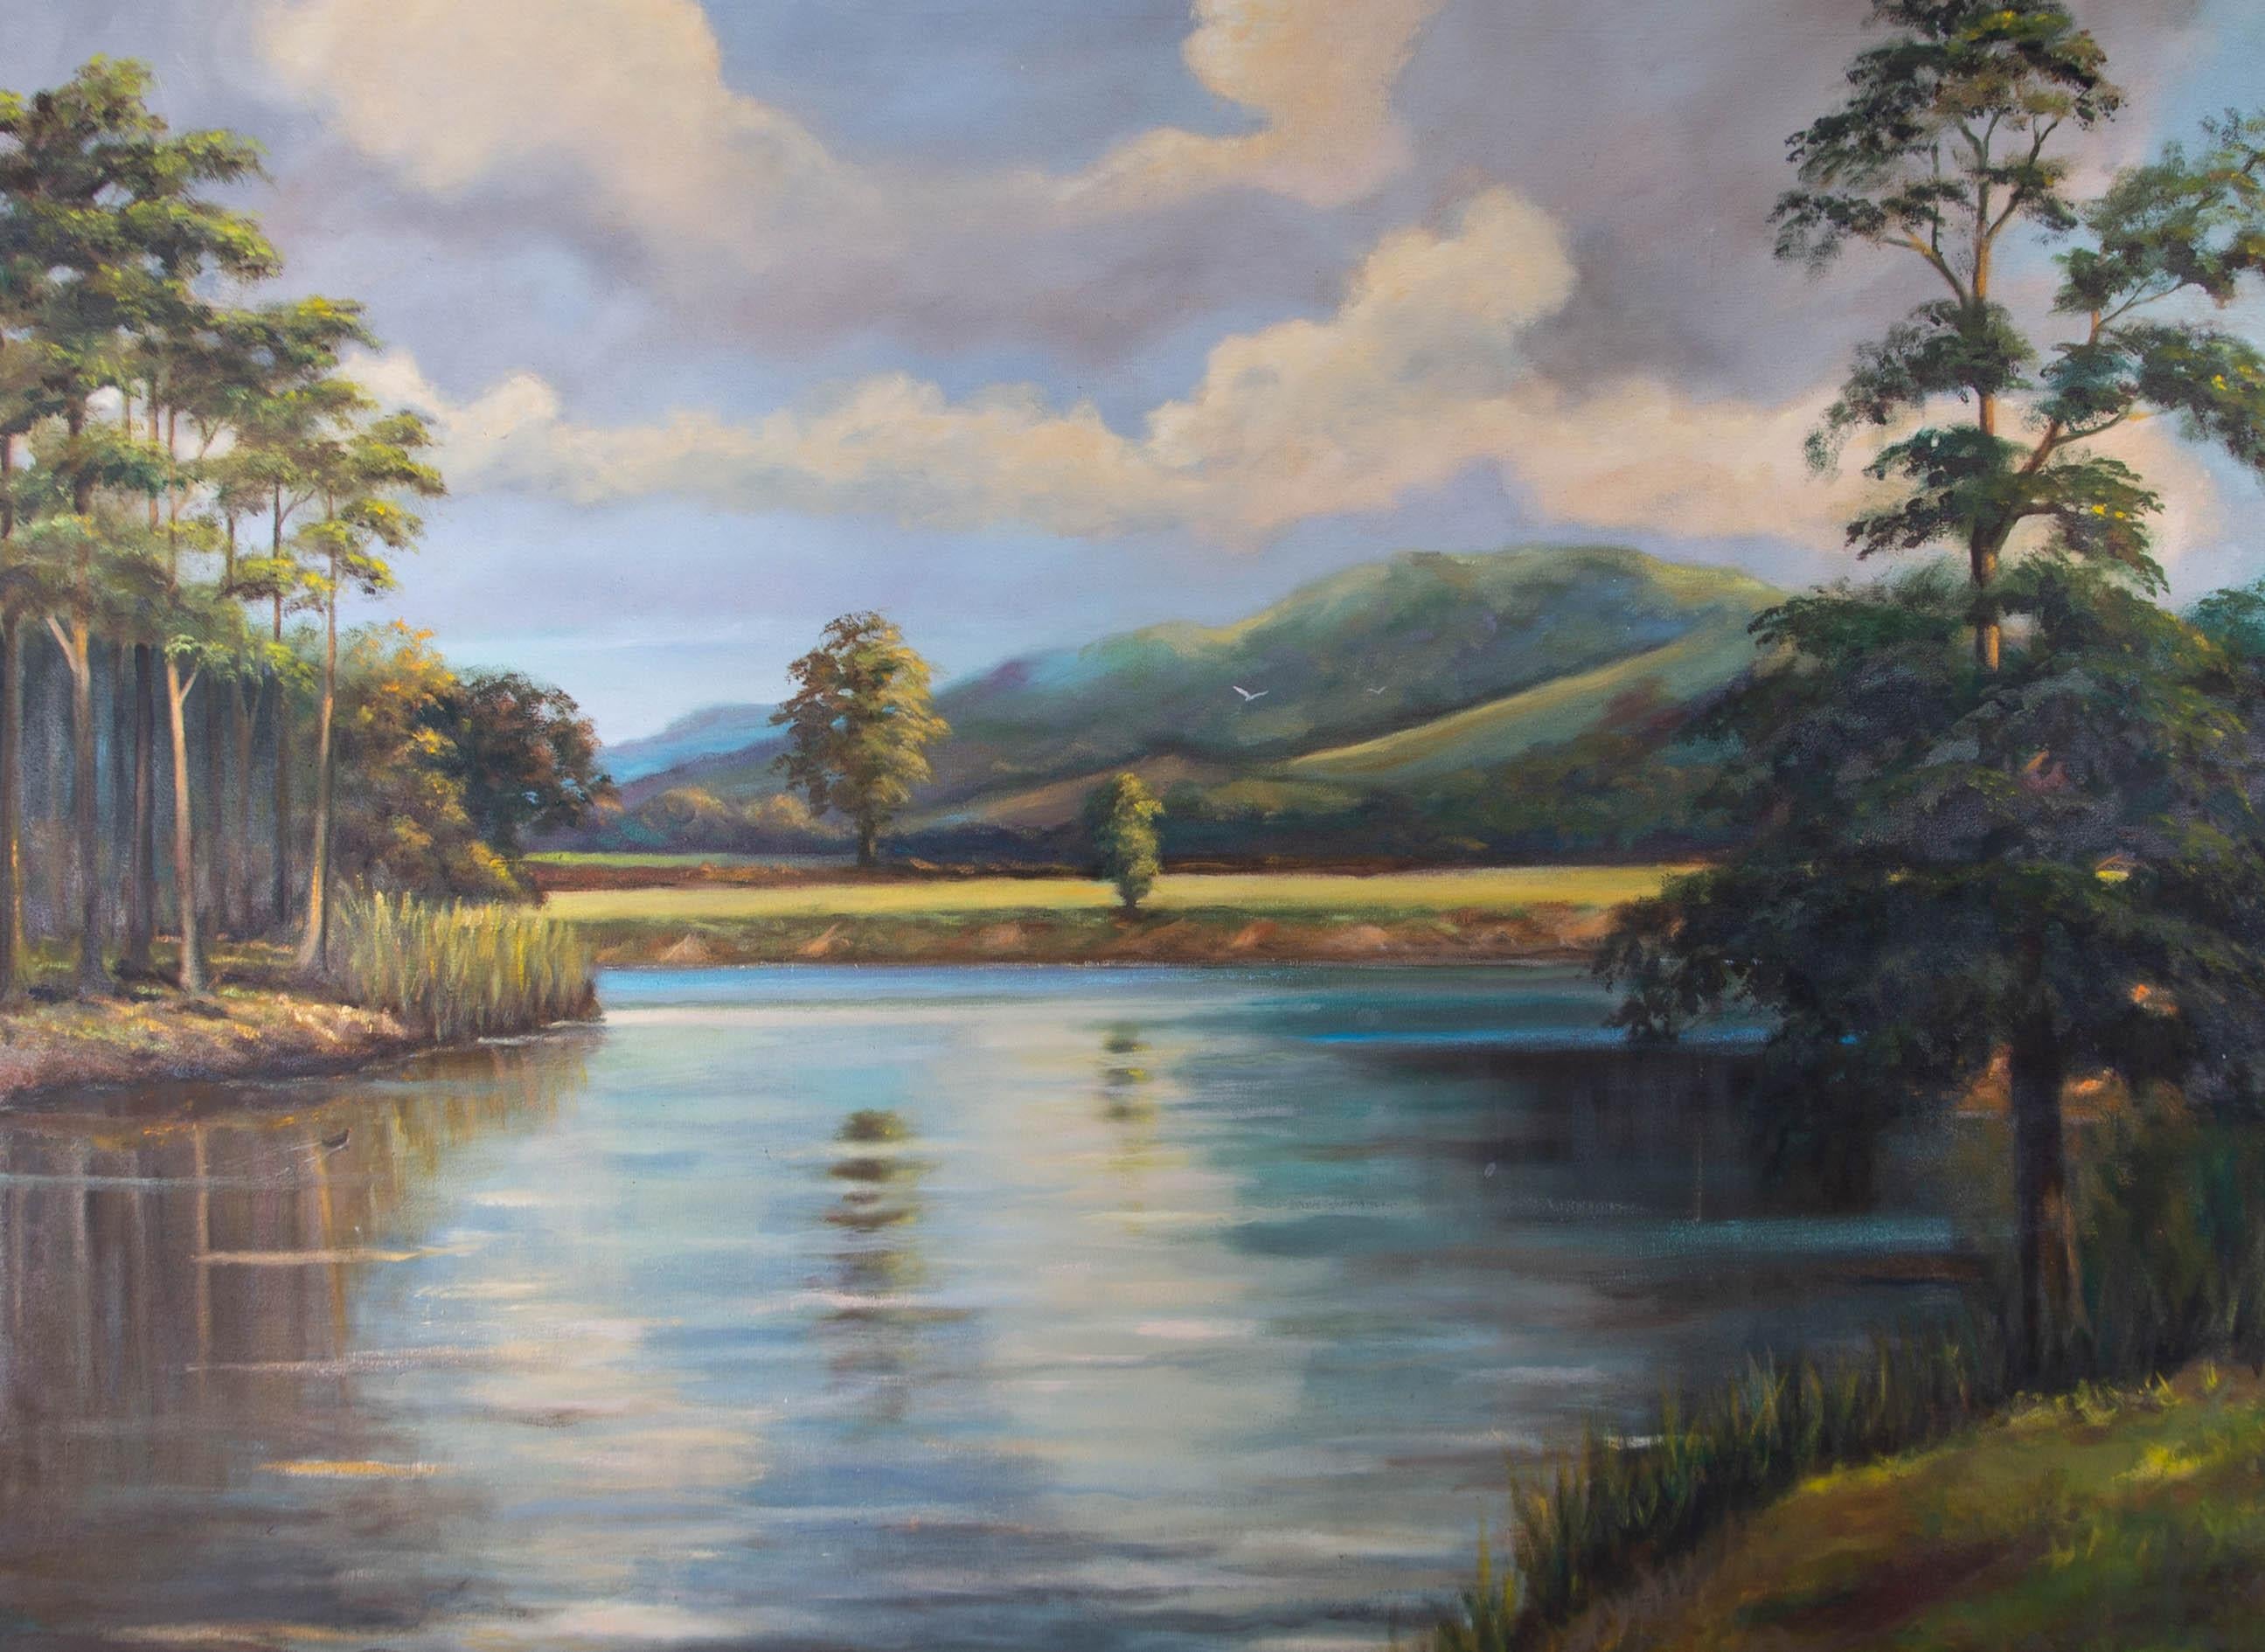 Contemporary Oil - Summer On The River - Painting by Unknown